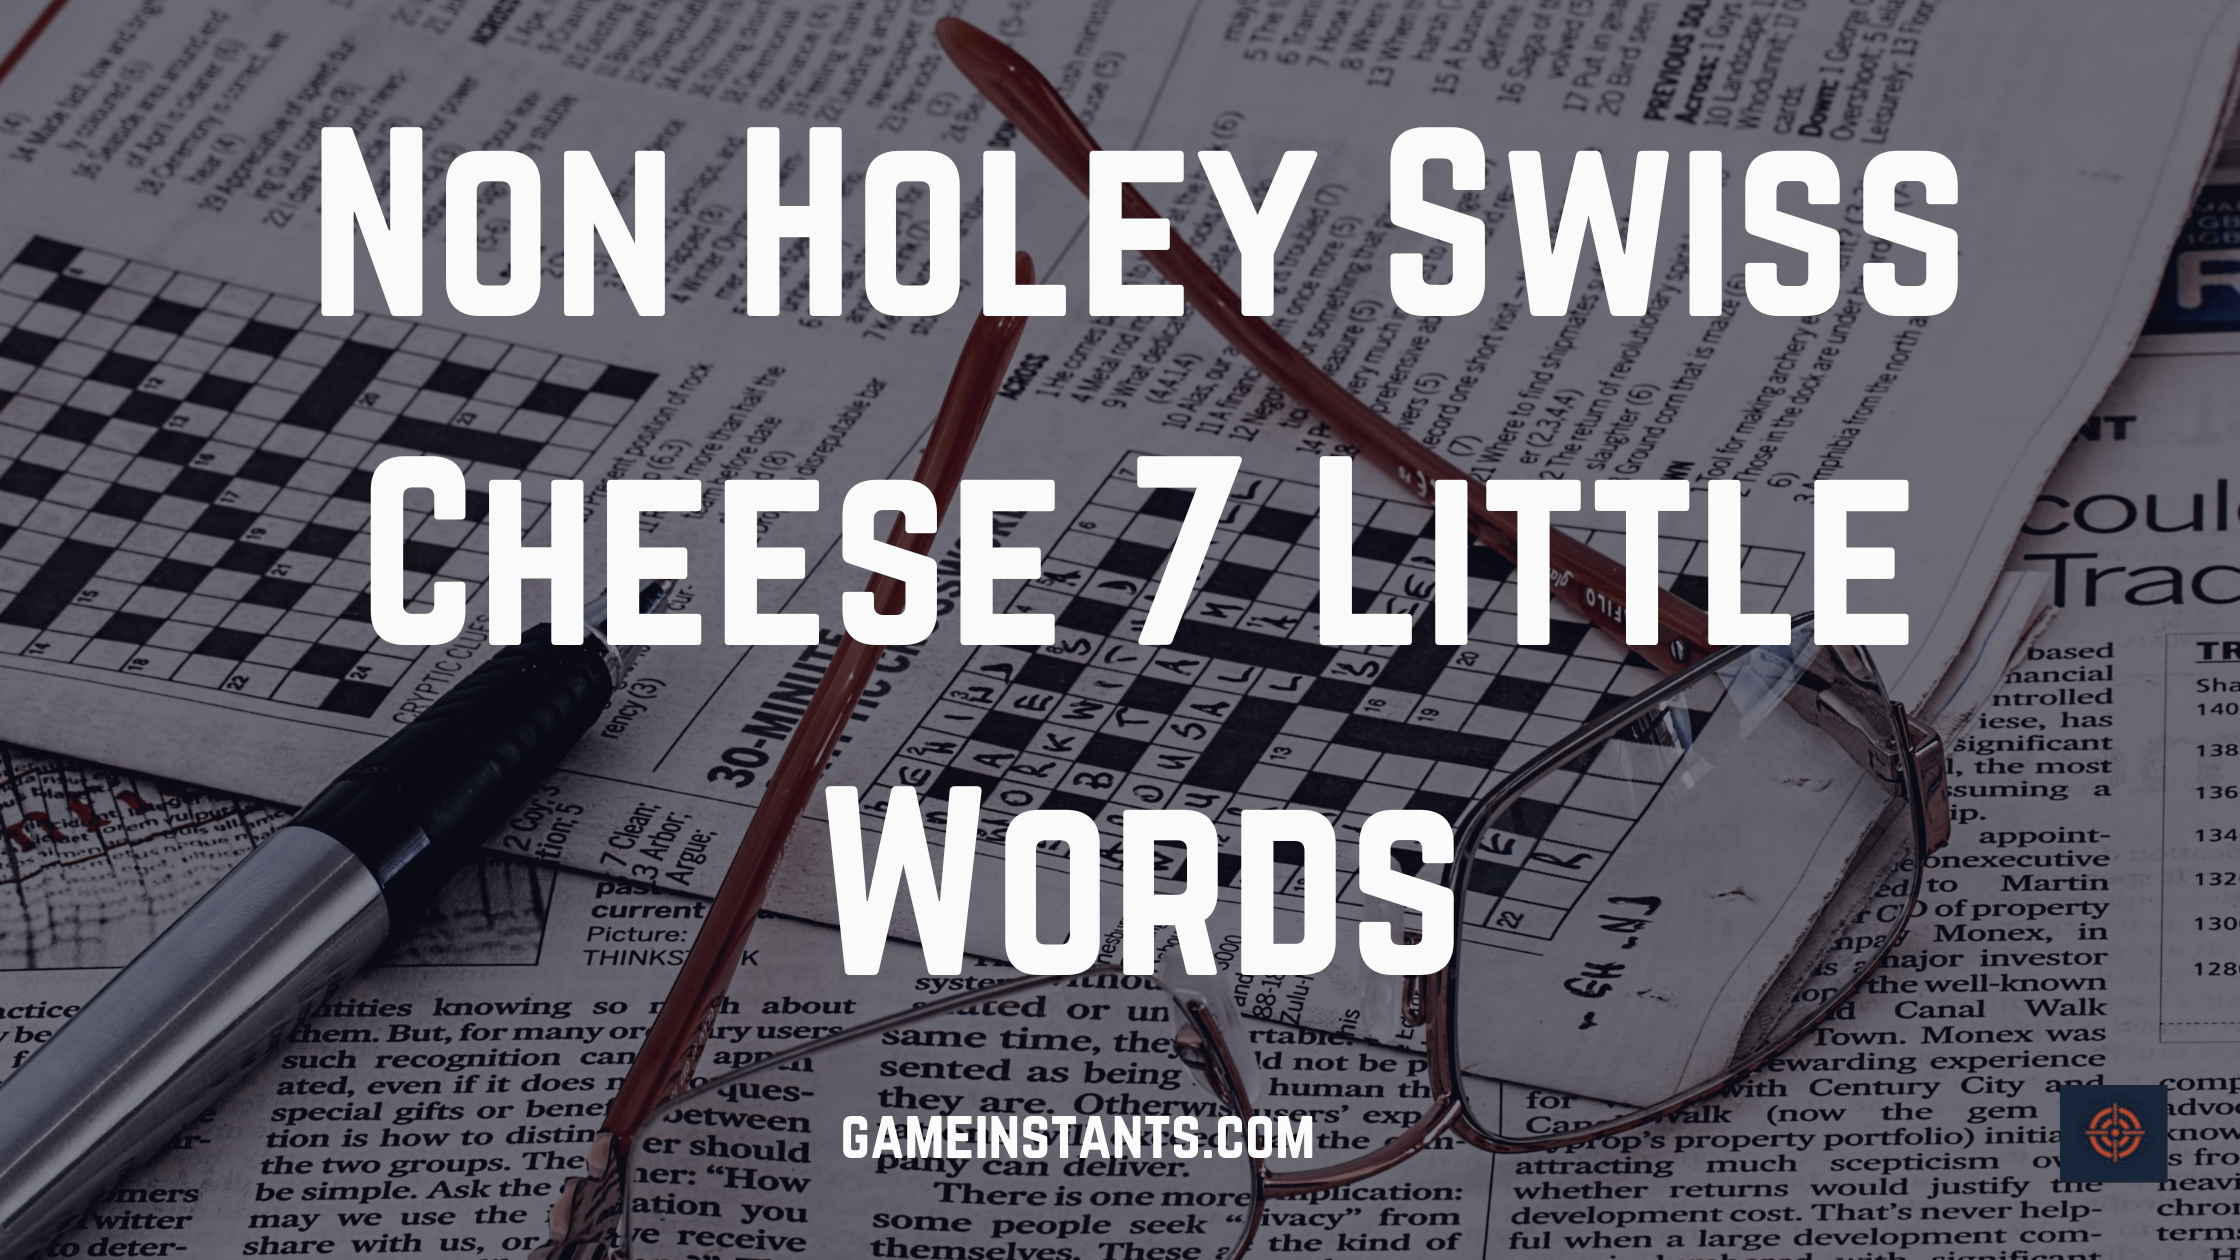 Non Holey Swiss Cheese 7 Little Words